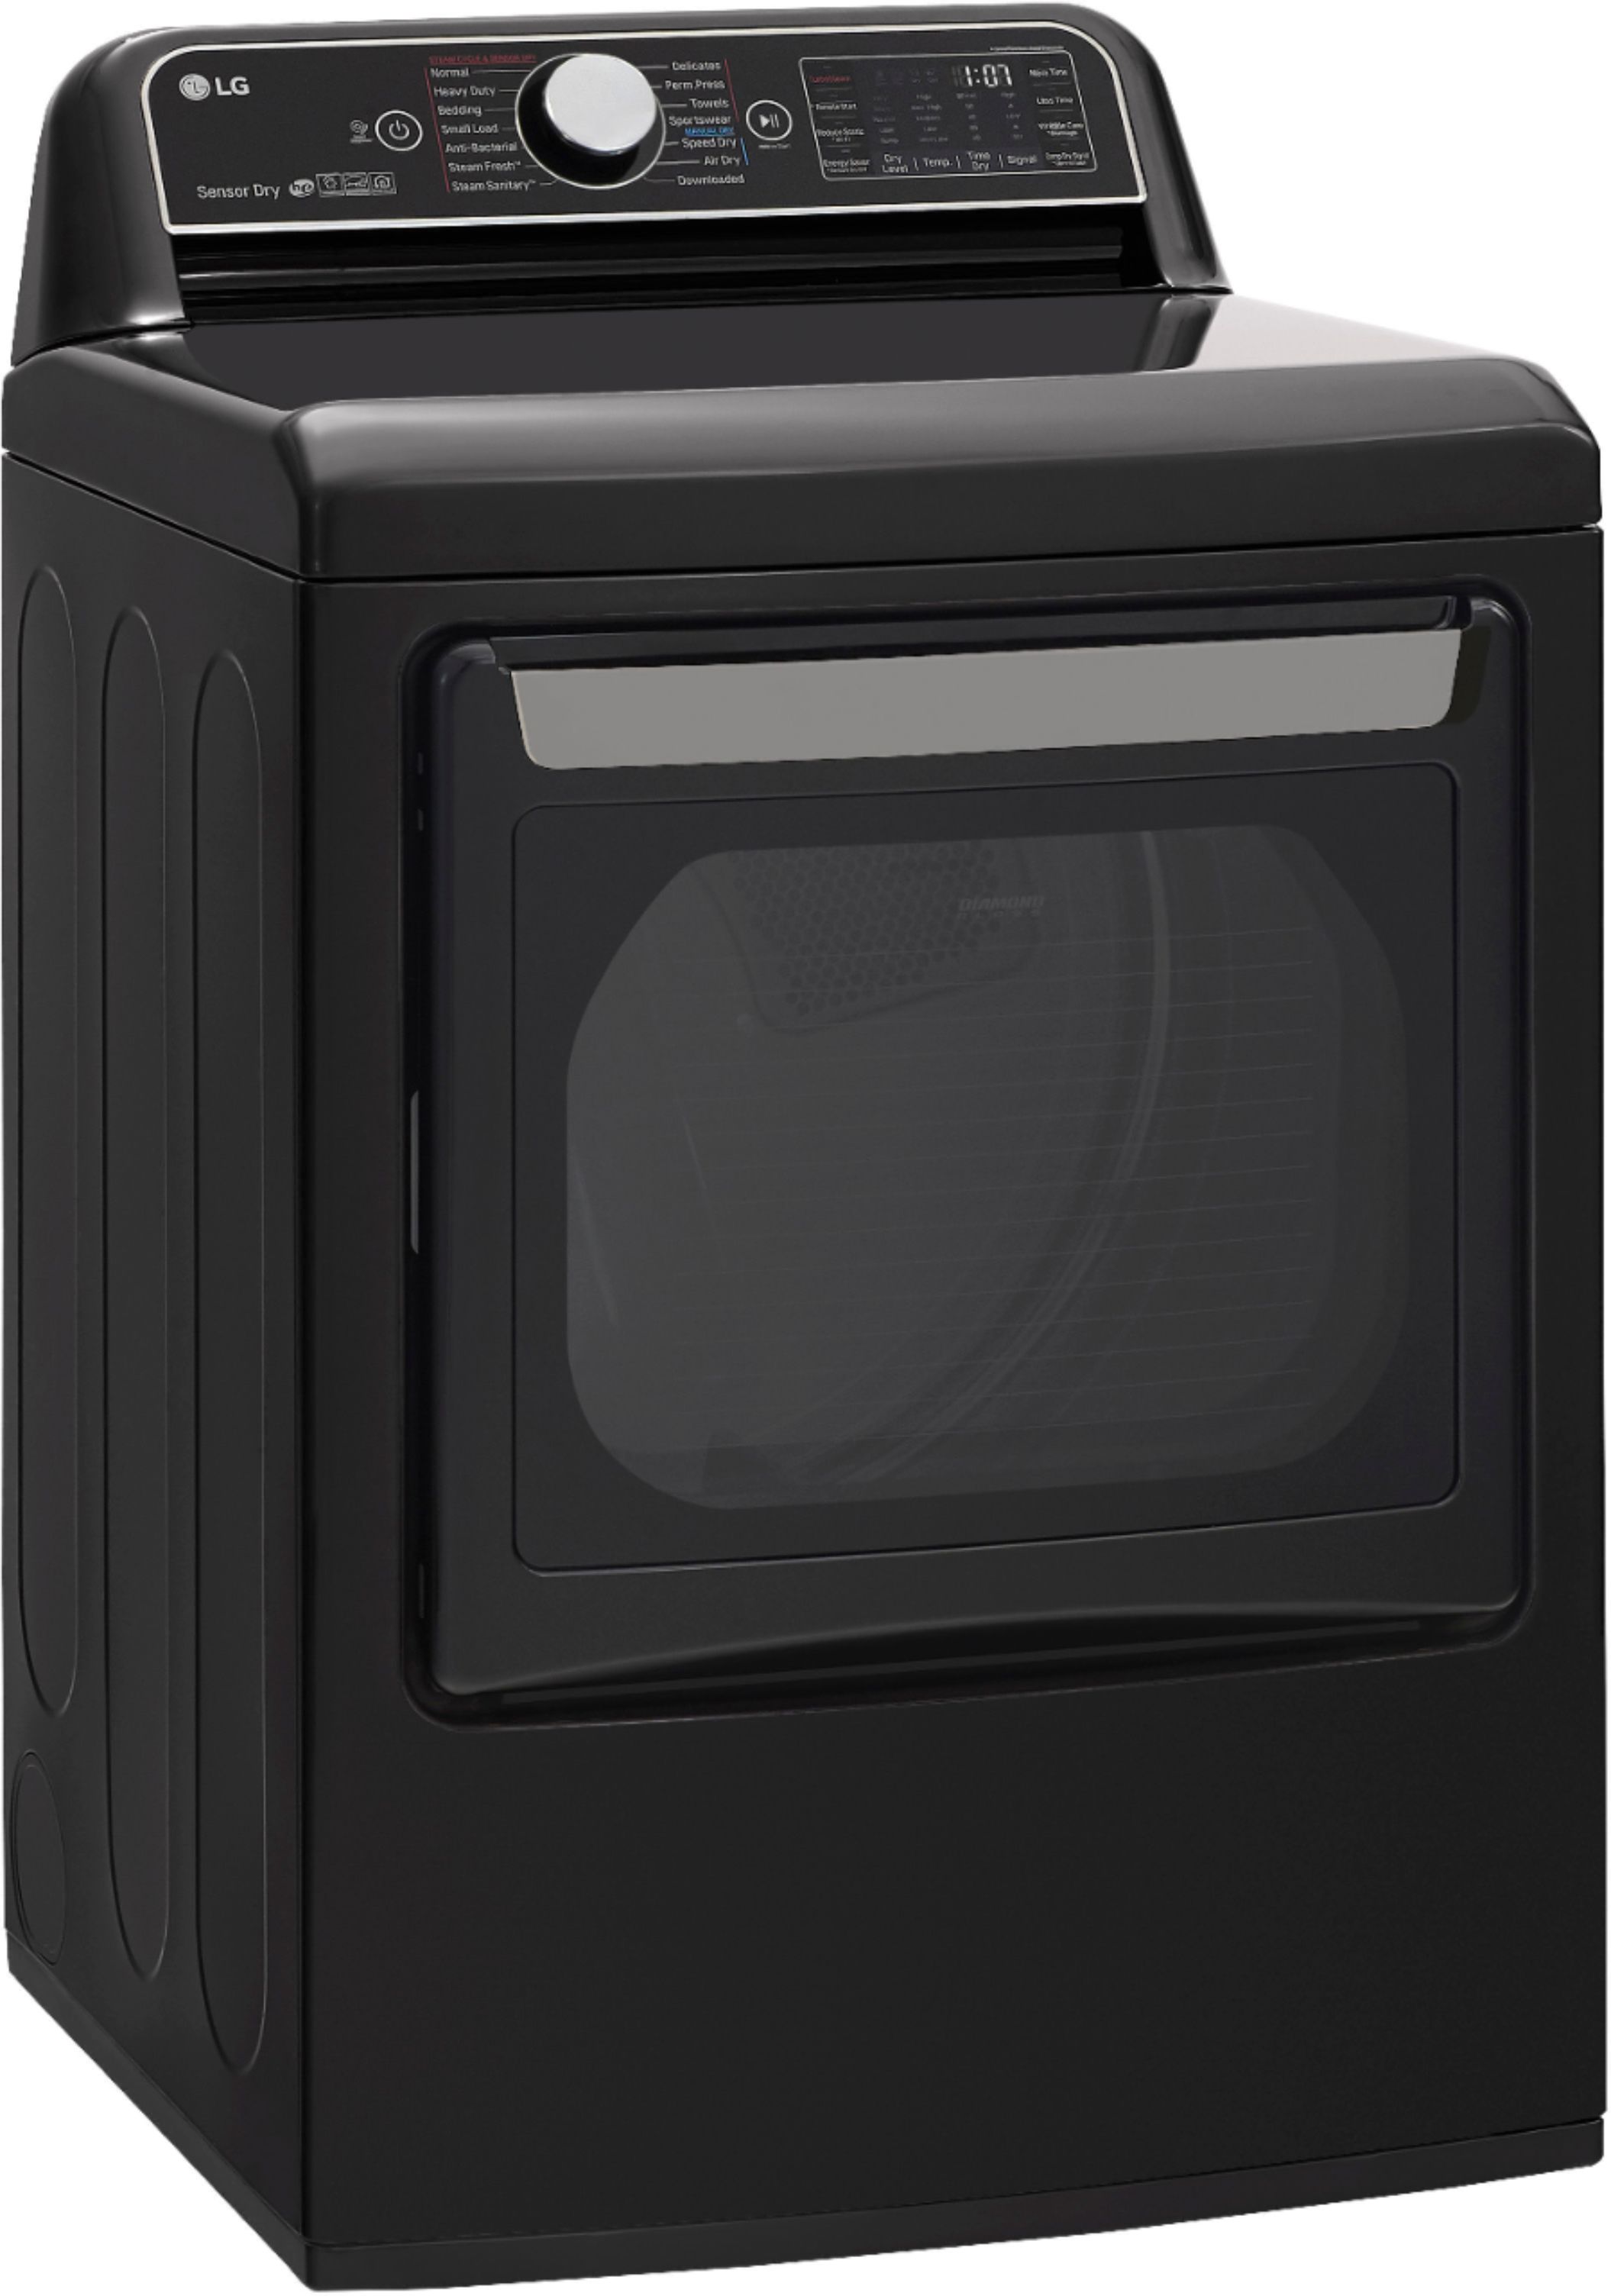 Angle View: LG - 7.3 Cu. Ft. Smart Electric Dryer with Steam and Sensor Dry - Black steel